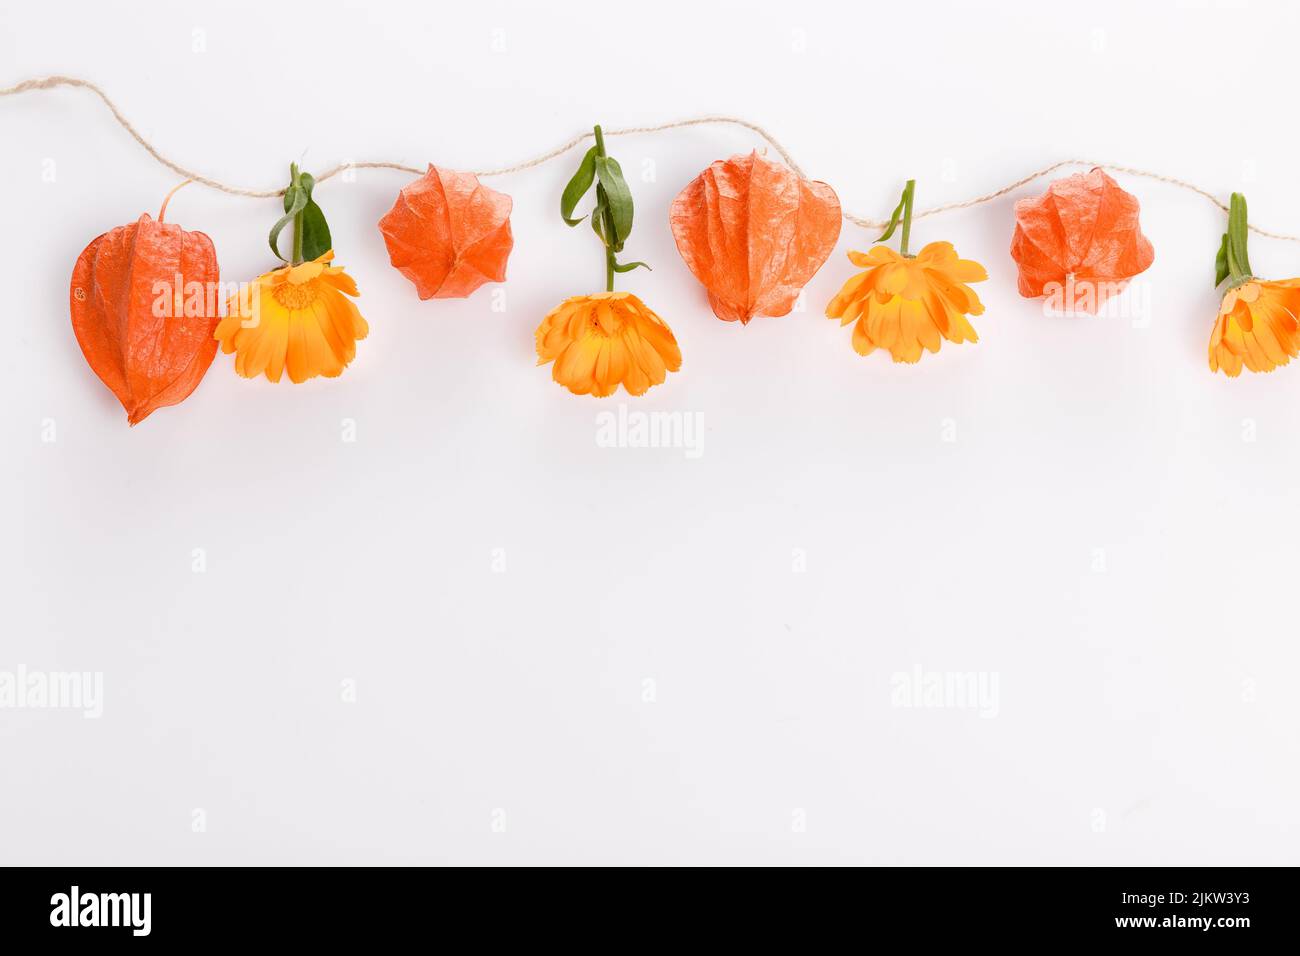 Autumn composition made of orange physalis and ball of twine on white background. Autumn, fall concept Stock Photo